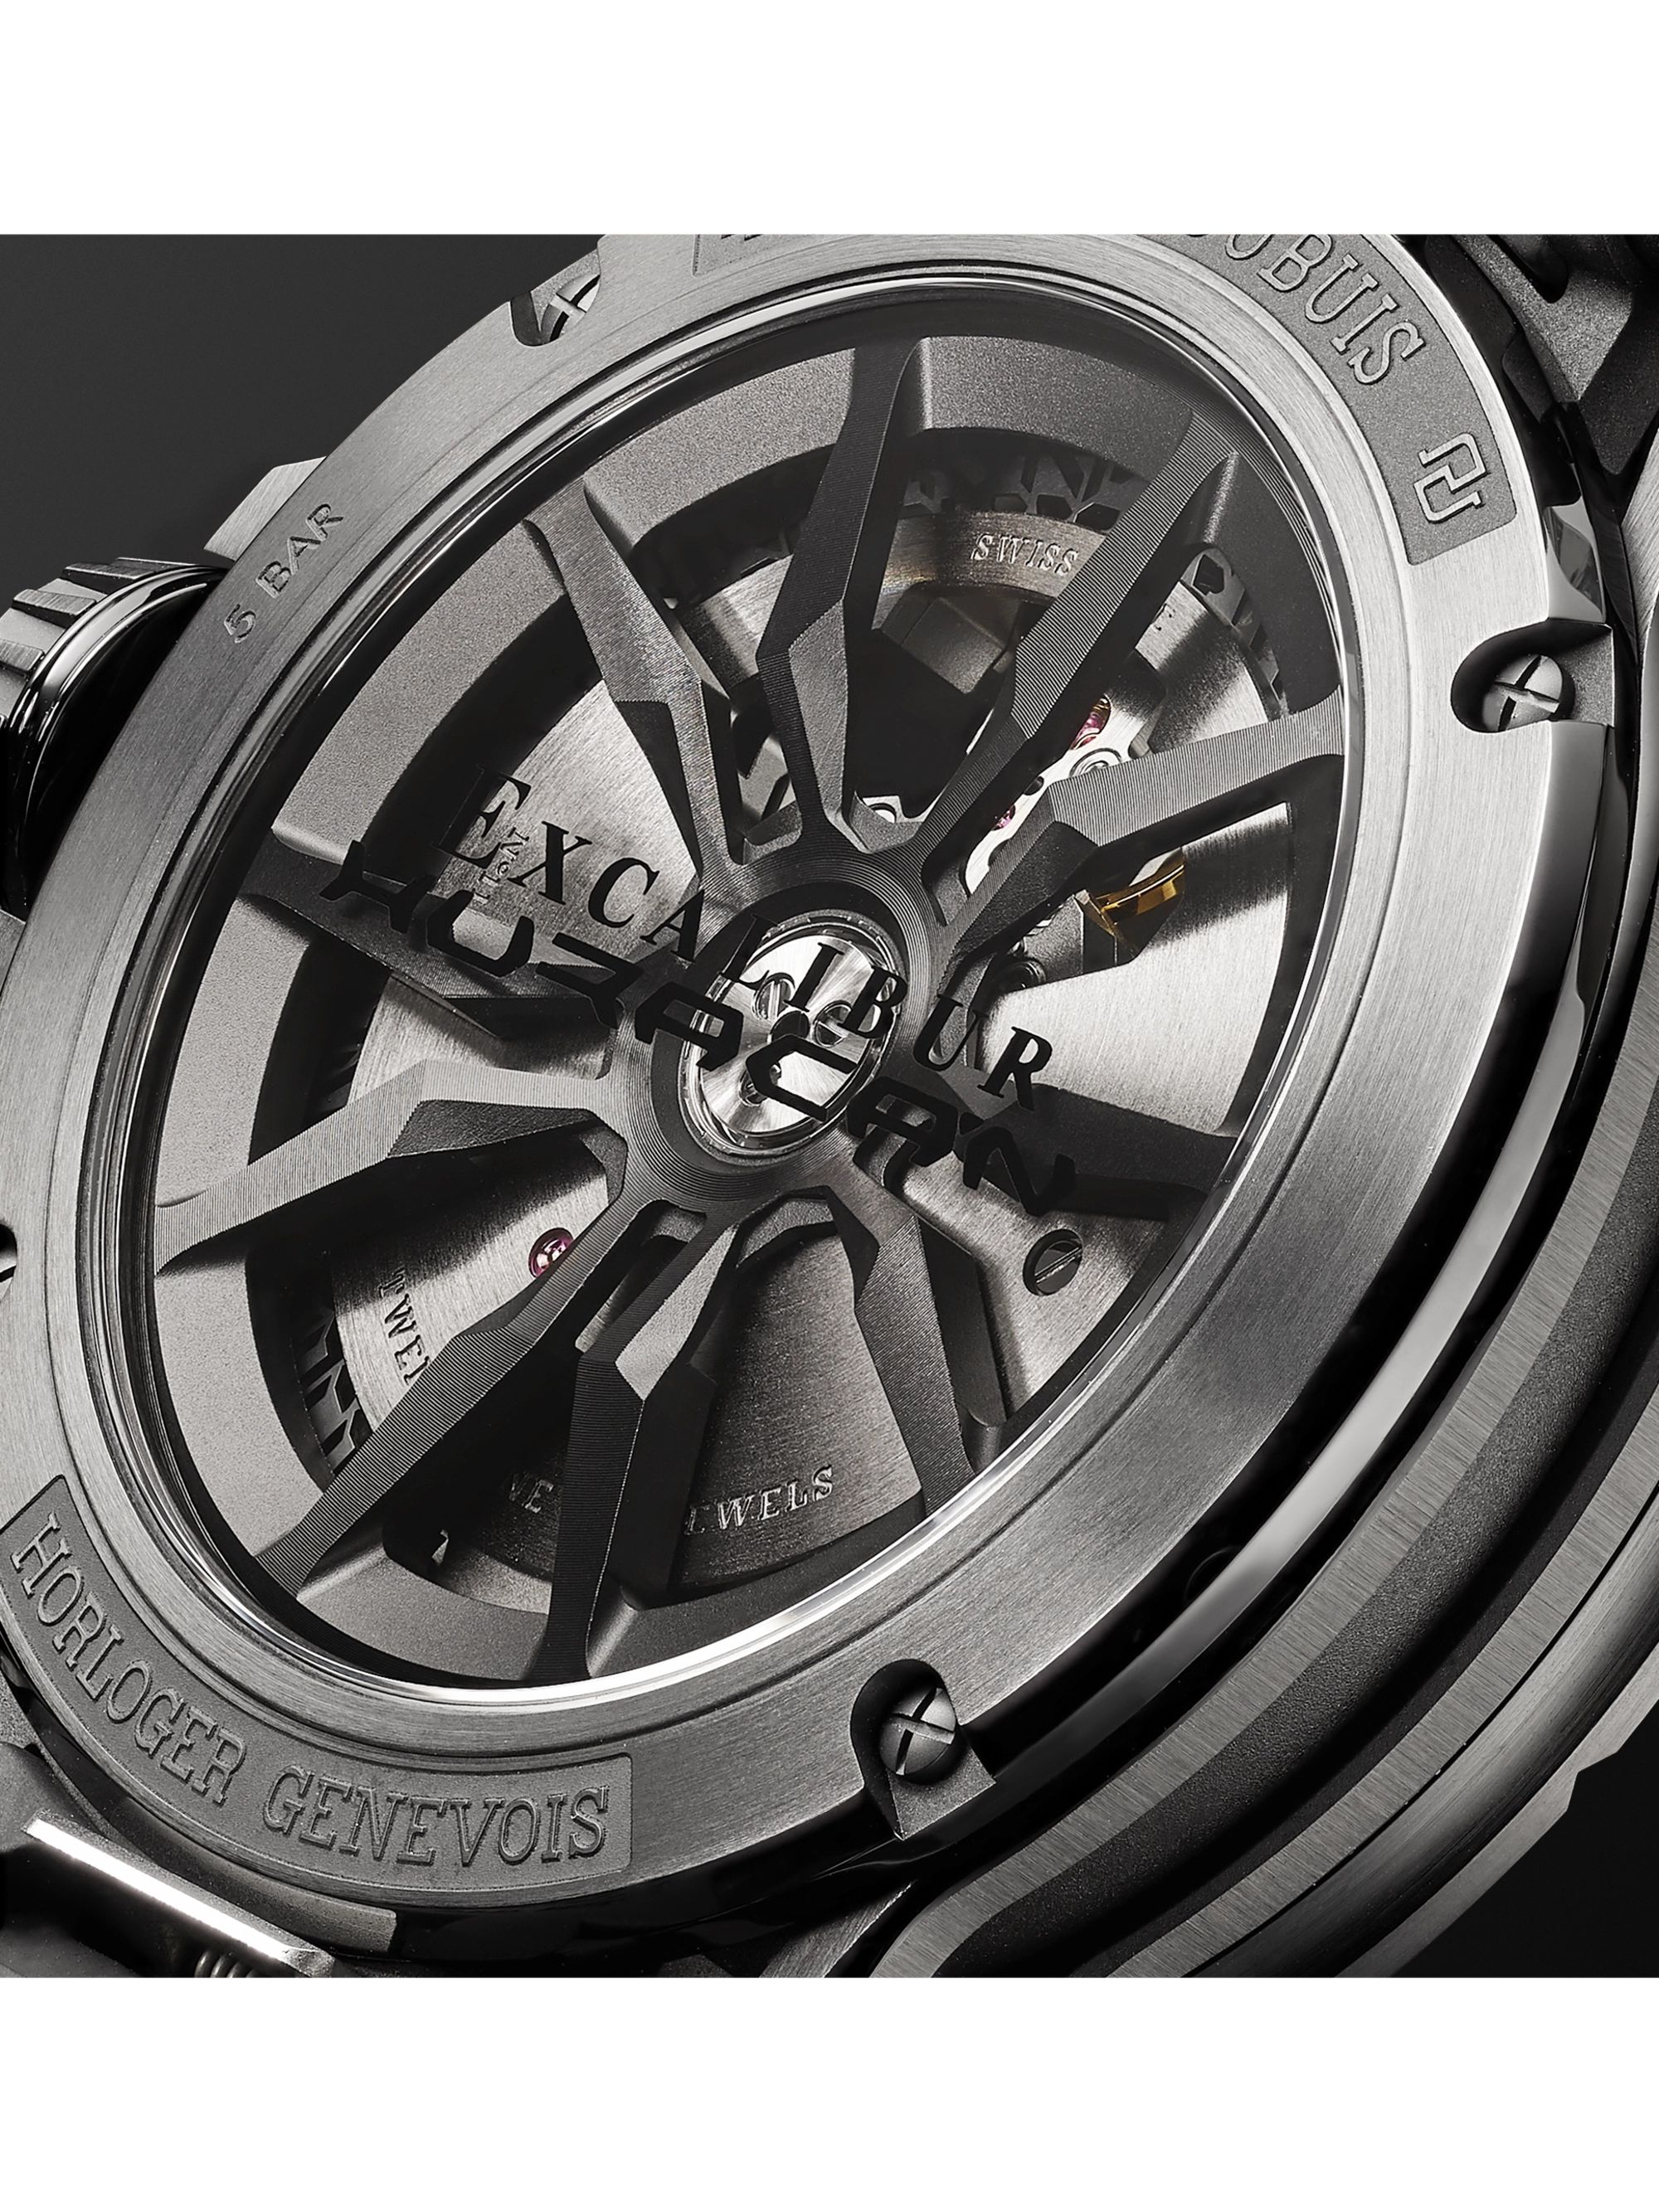 ROGER DUBUIS Excalibur Spider Huracán Black DLC Automatic 45mm Titanium and Rubber Watch, Ref. No. RDDBEX0829